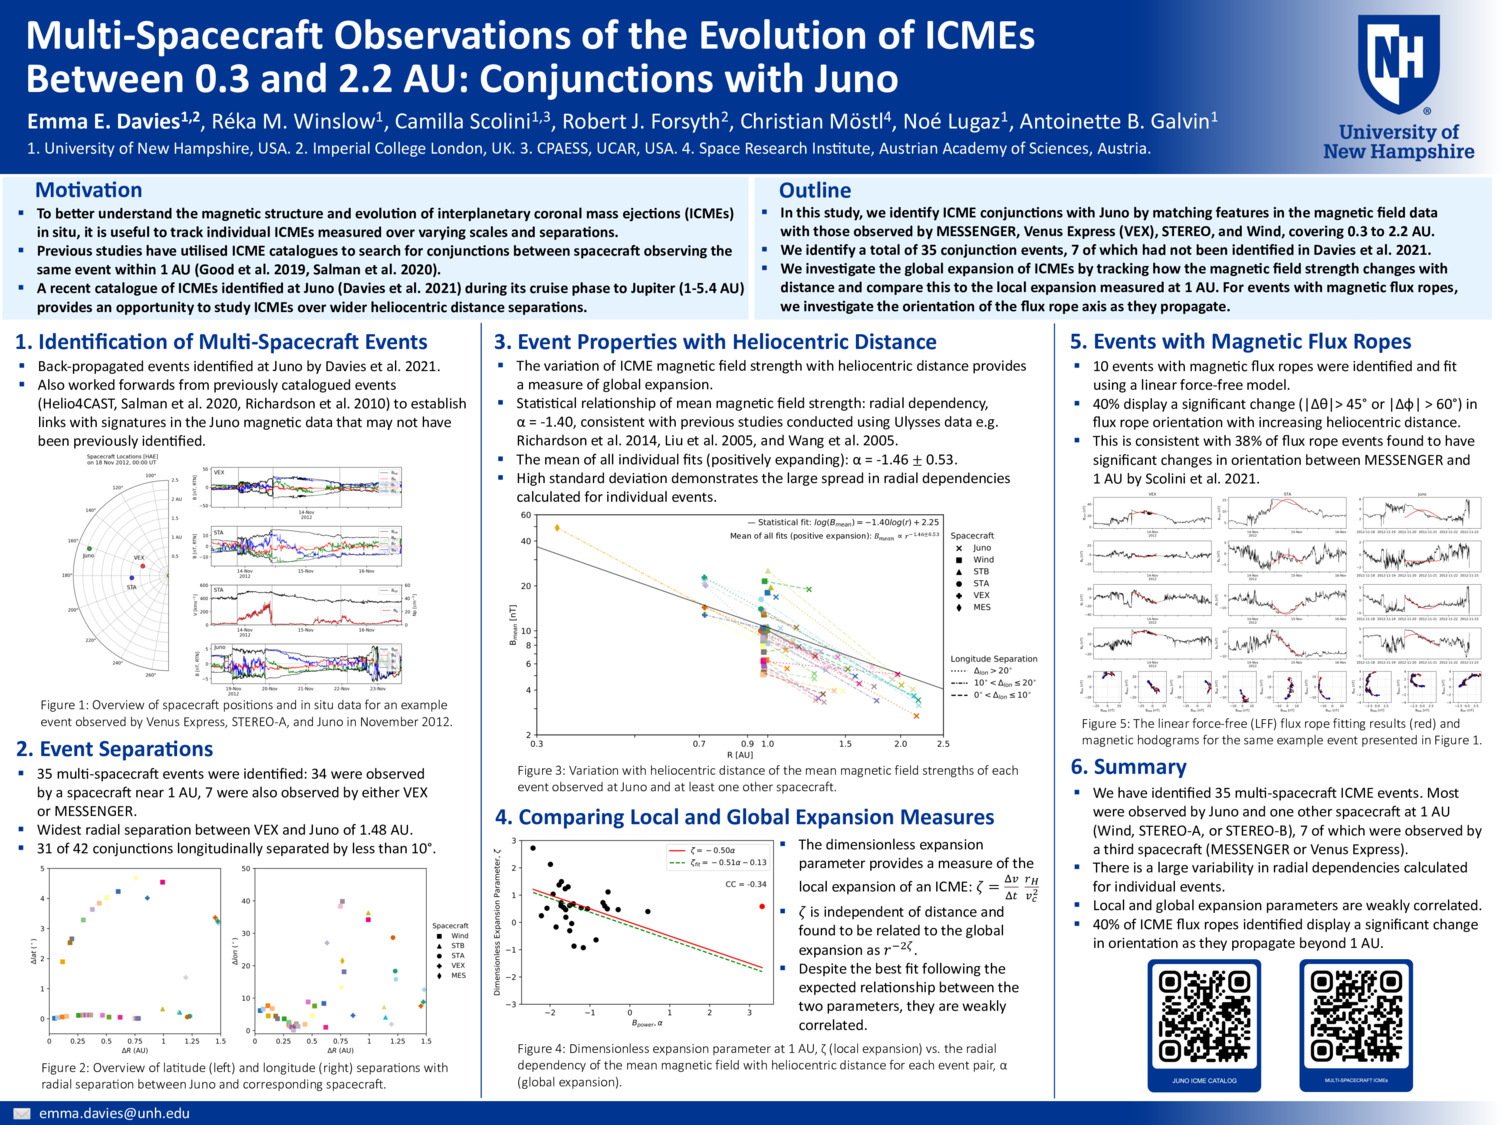 Multi-Spacecraft Observations Of The Evolution Of Icmes Between 0.3 And 2.2 Au: Conjunctions With Juno by eedavies